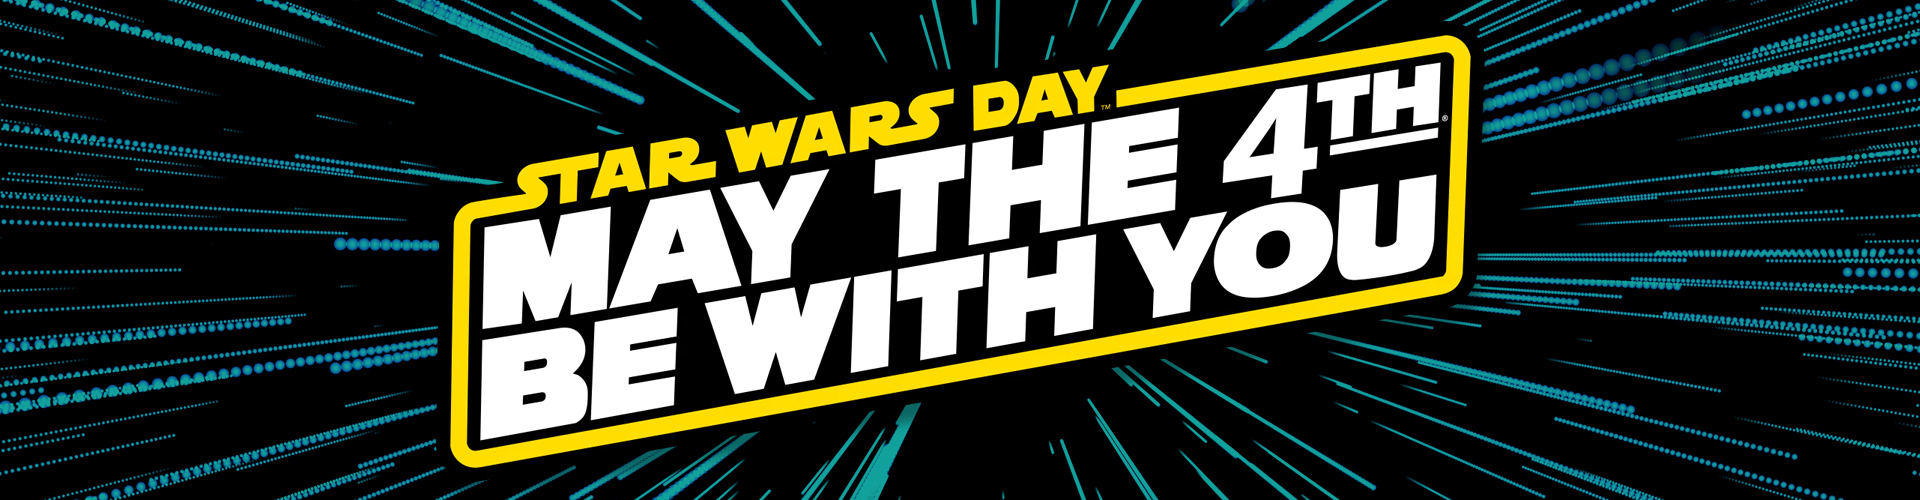 header image with the text "May The 4th Be With You" in celebration of Star Wars Day